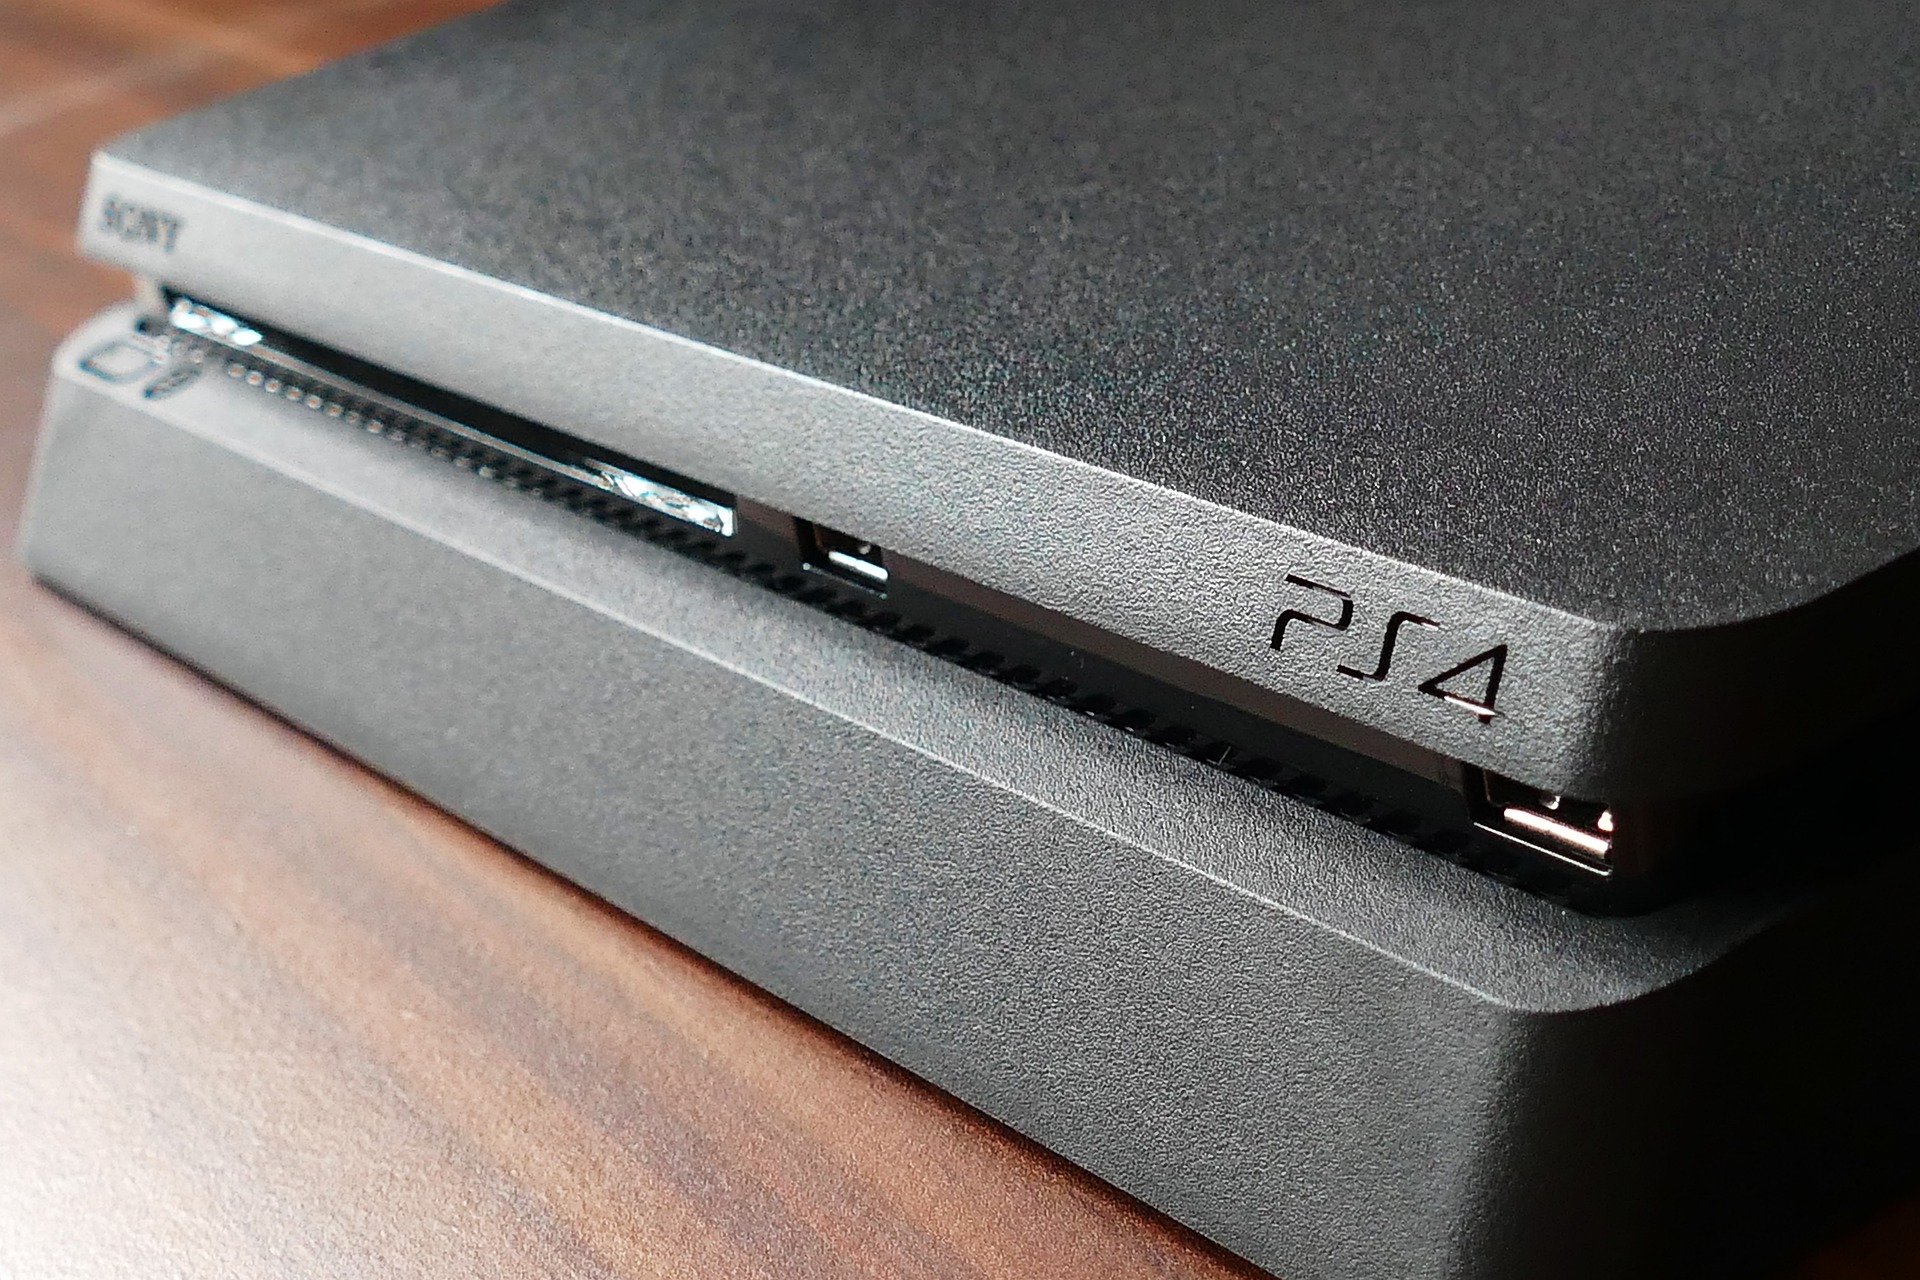 Comprehensive Guide: How to Fix Your PS4 Console